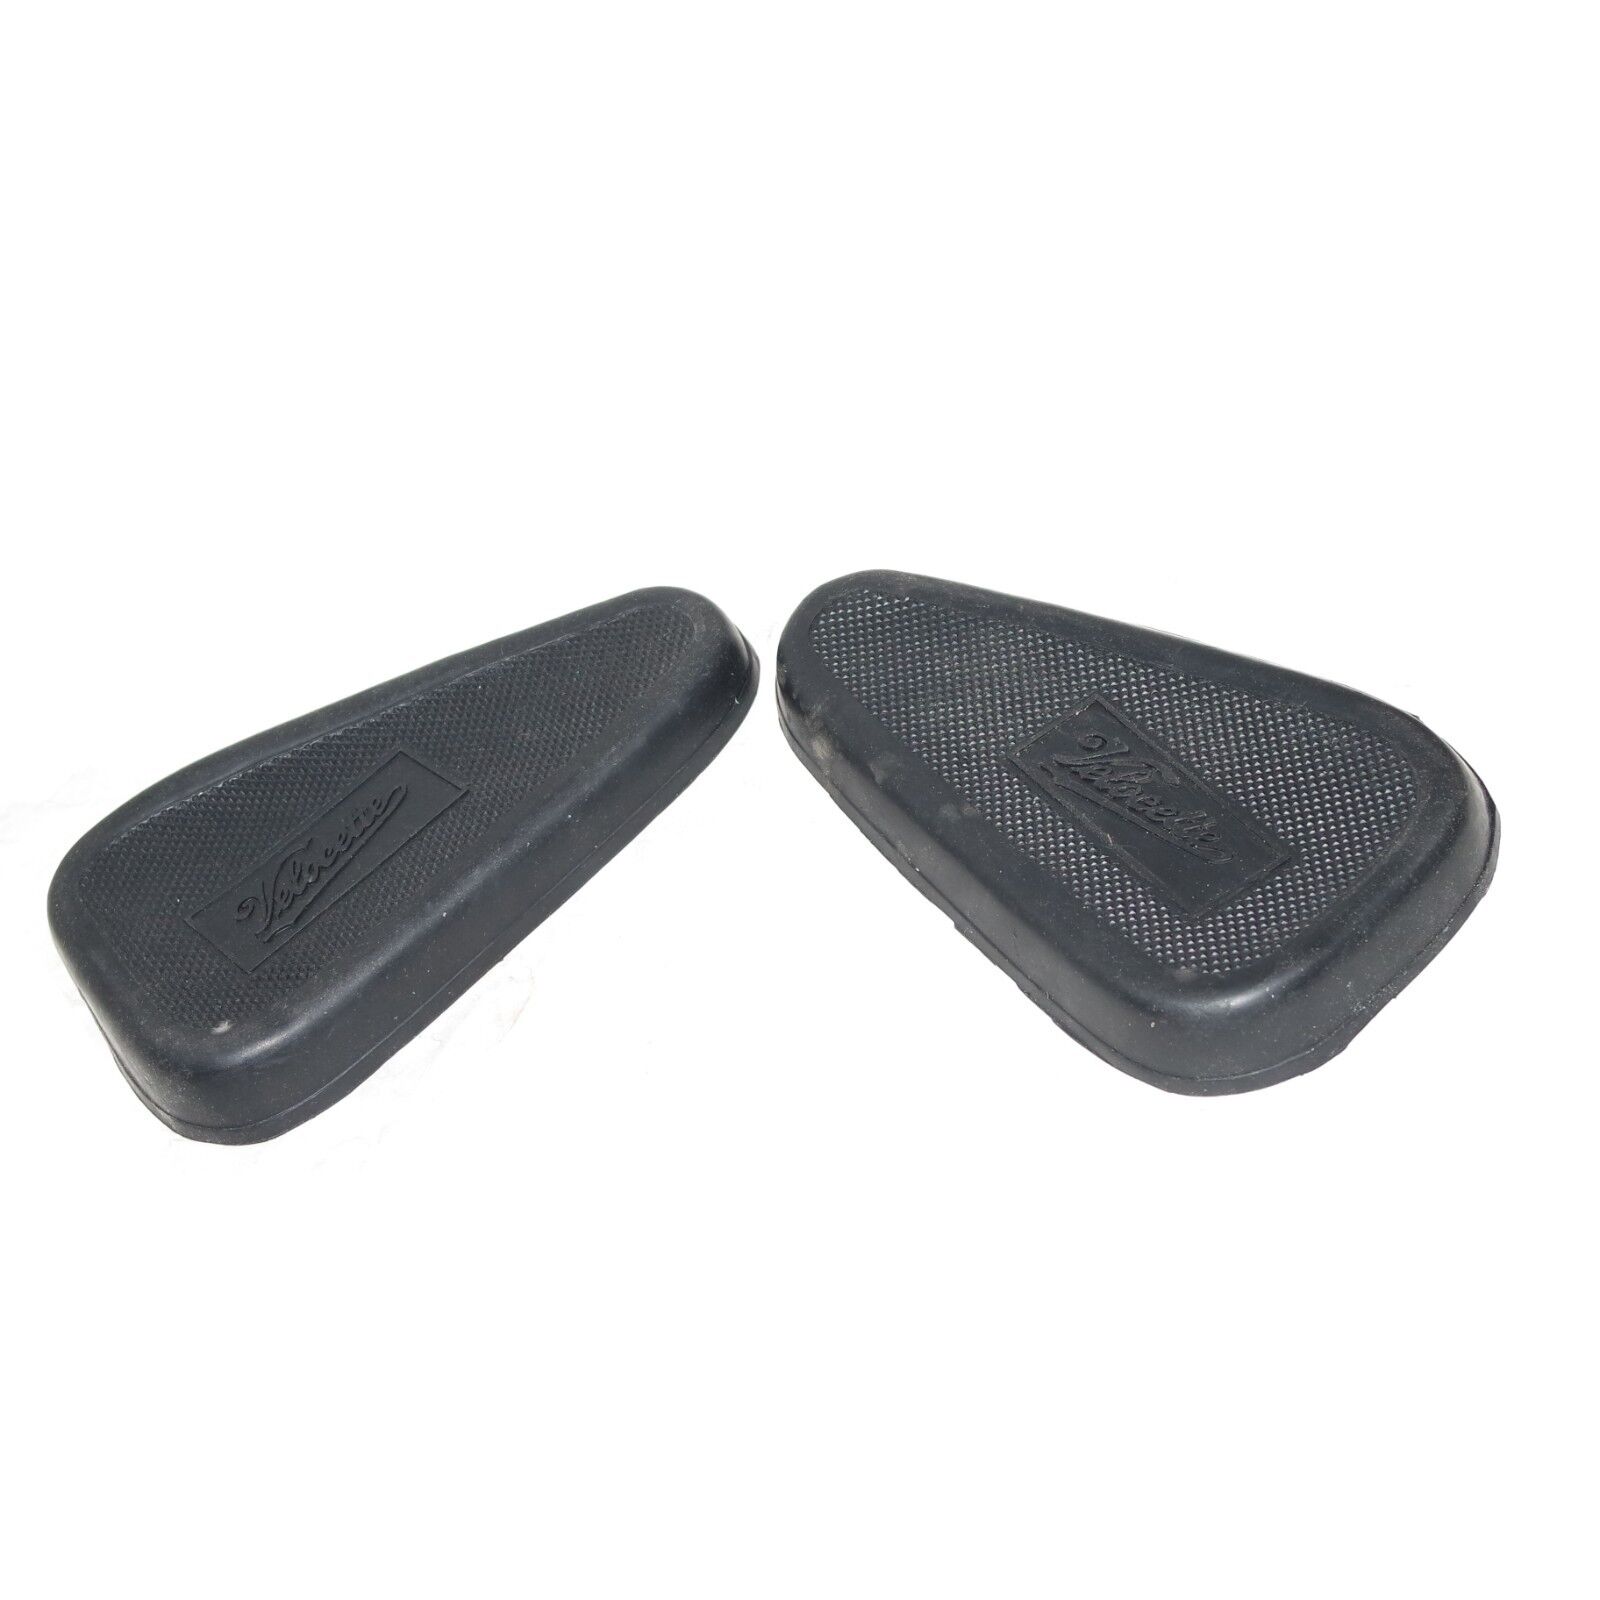 Velocette Gas Petrol Fuel Tank Knee Pads Grip Rubber Up to 1940 Models 